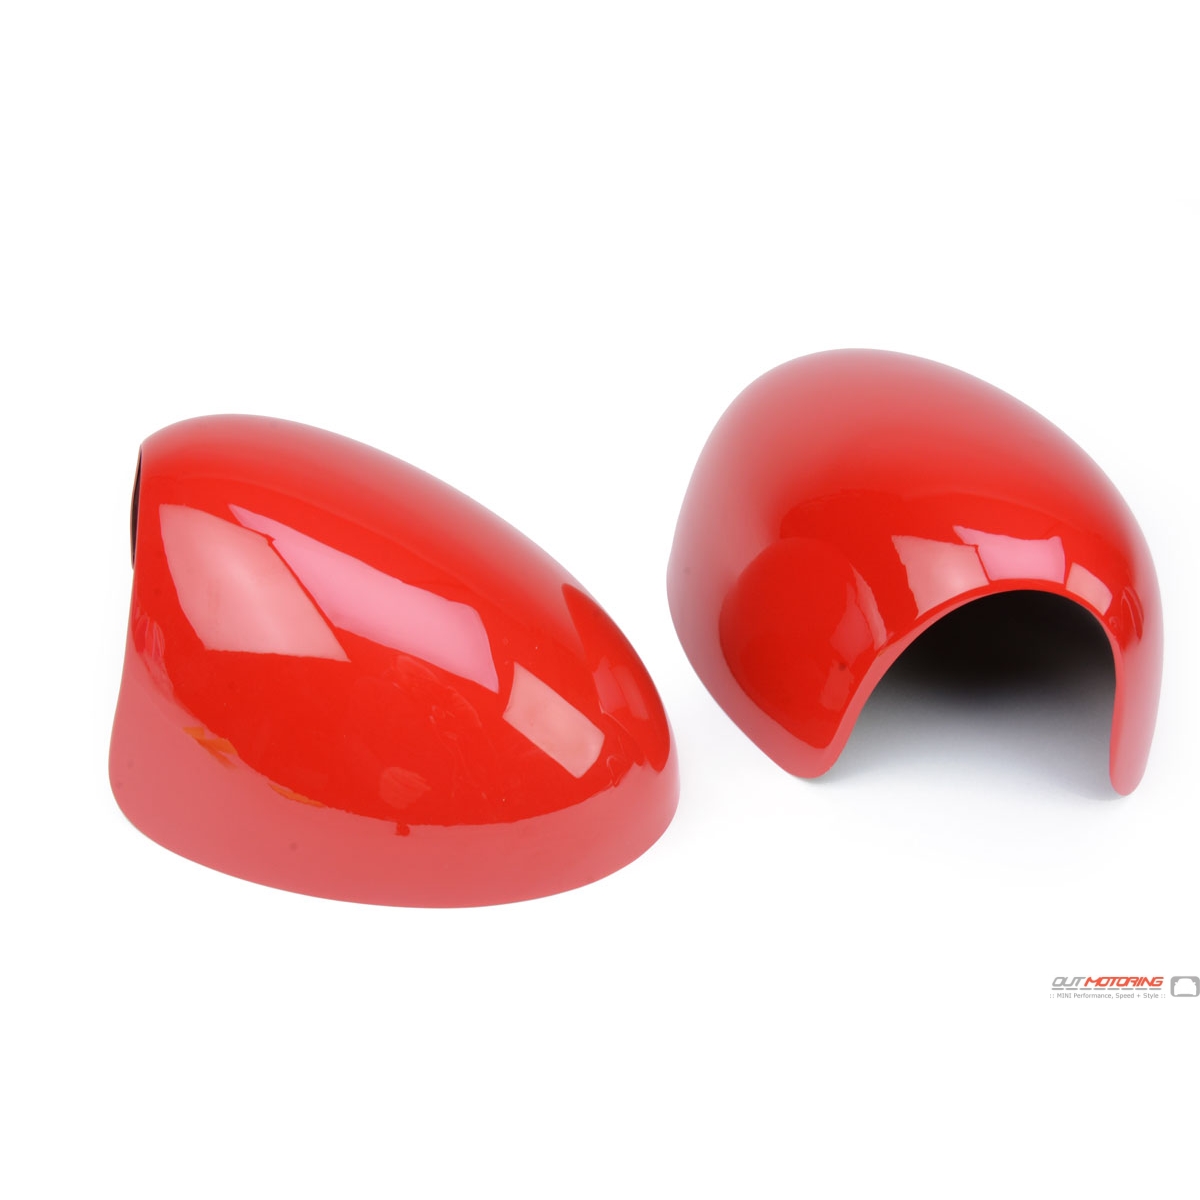 Red Stretchy Series Cover fuer New Mini, Cooper, S R53 John Cooper